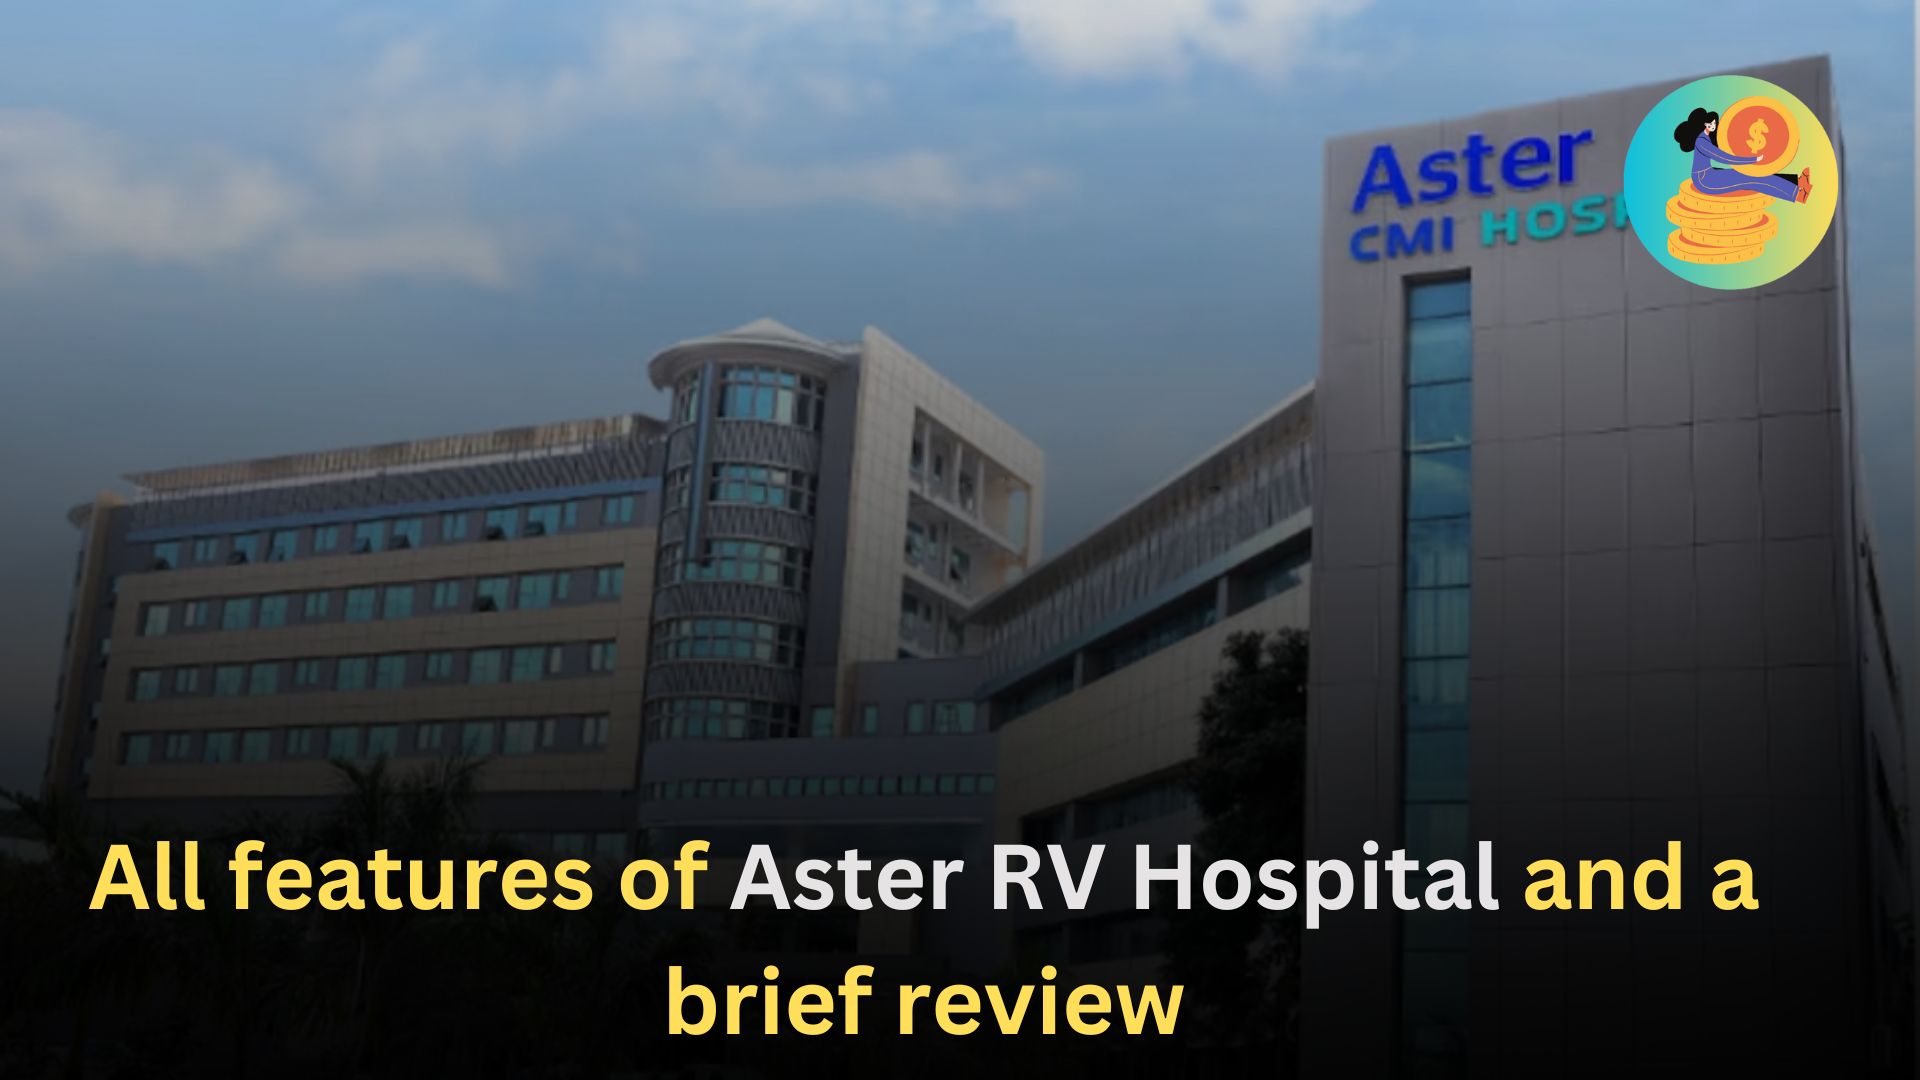 All features of Aster RV Hospital and a brief review